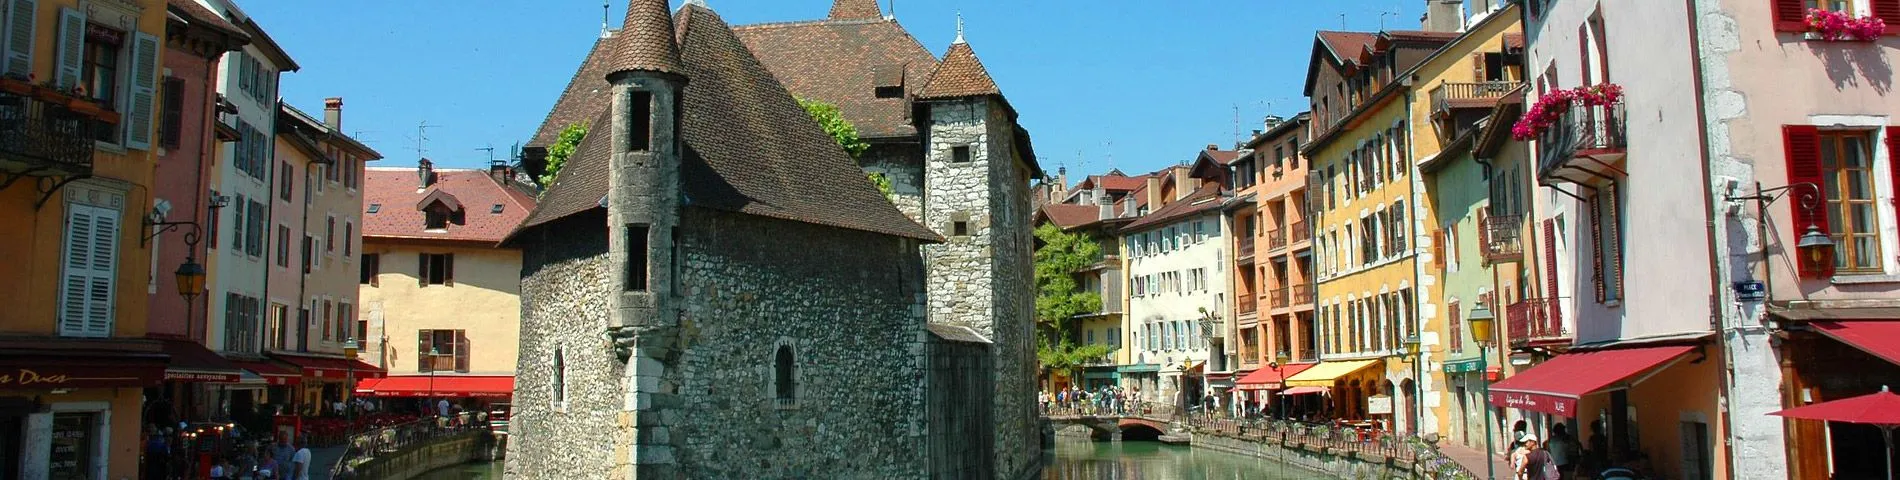 Annecy - General